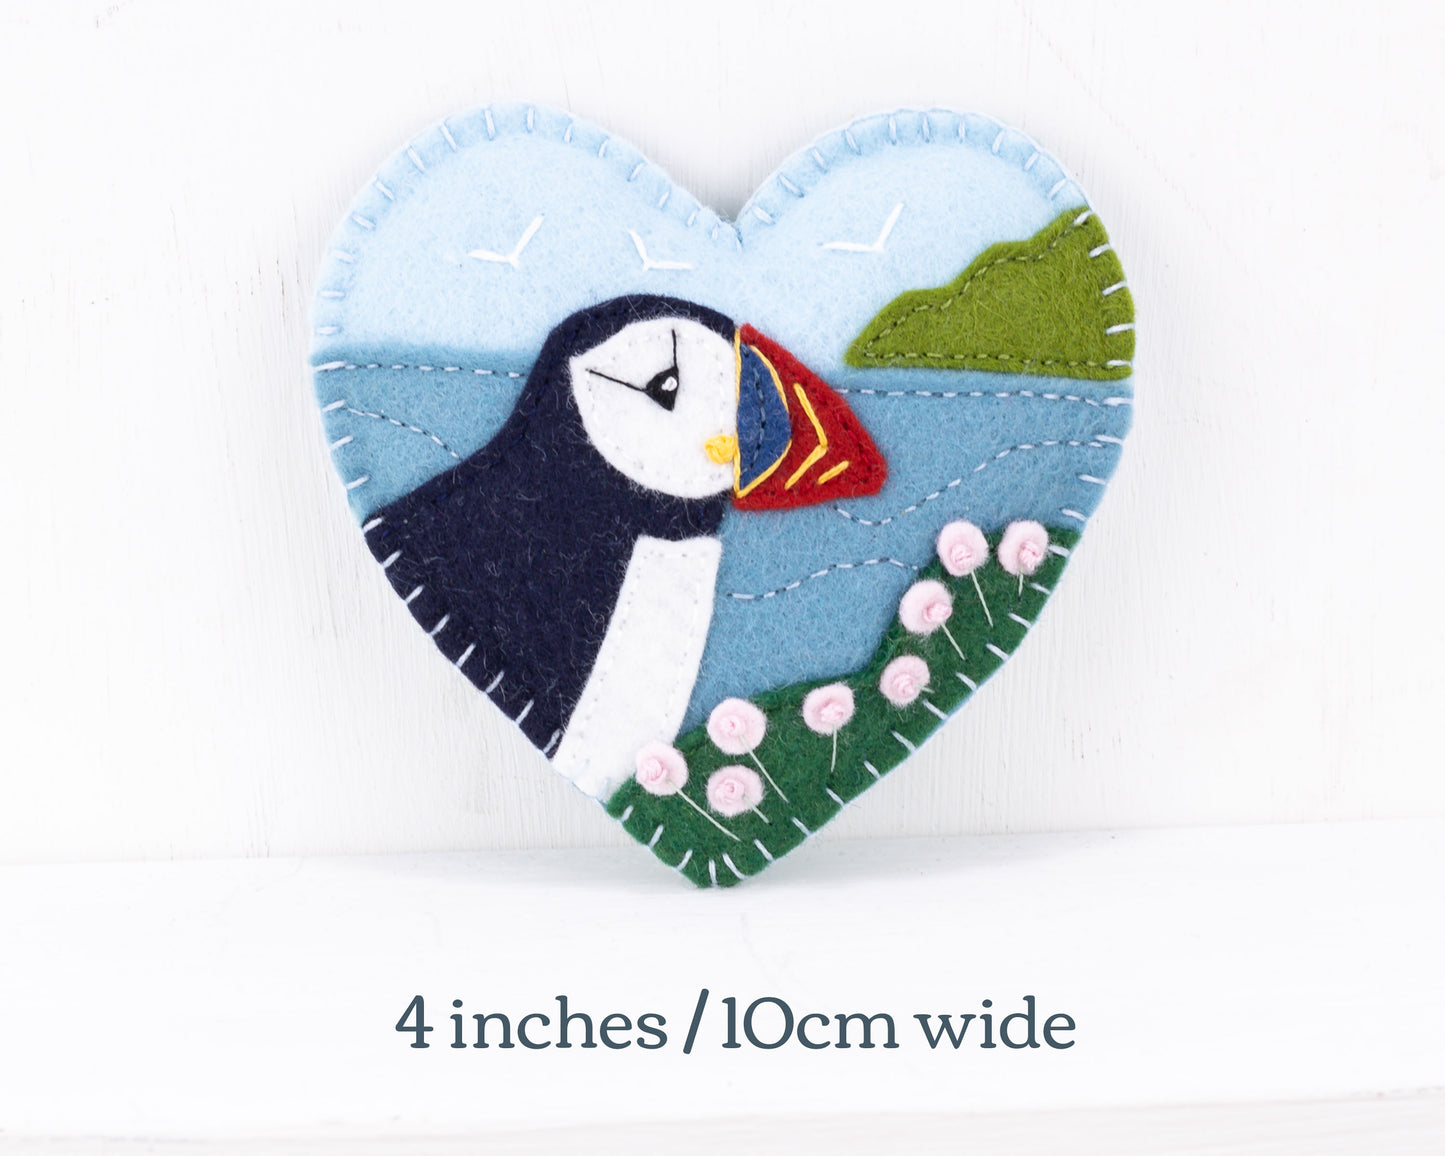 Puffin and Sea Pinks Felt Heart Ornament